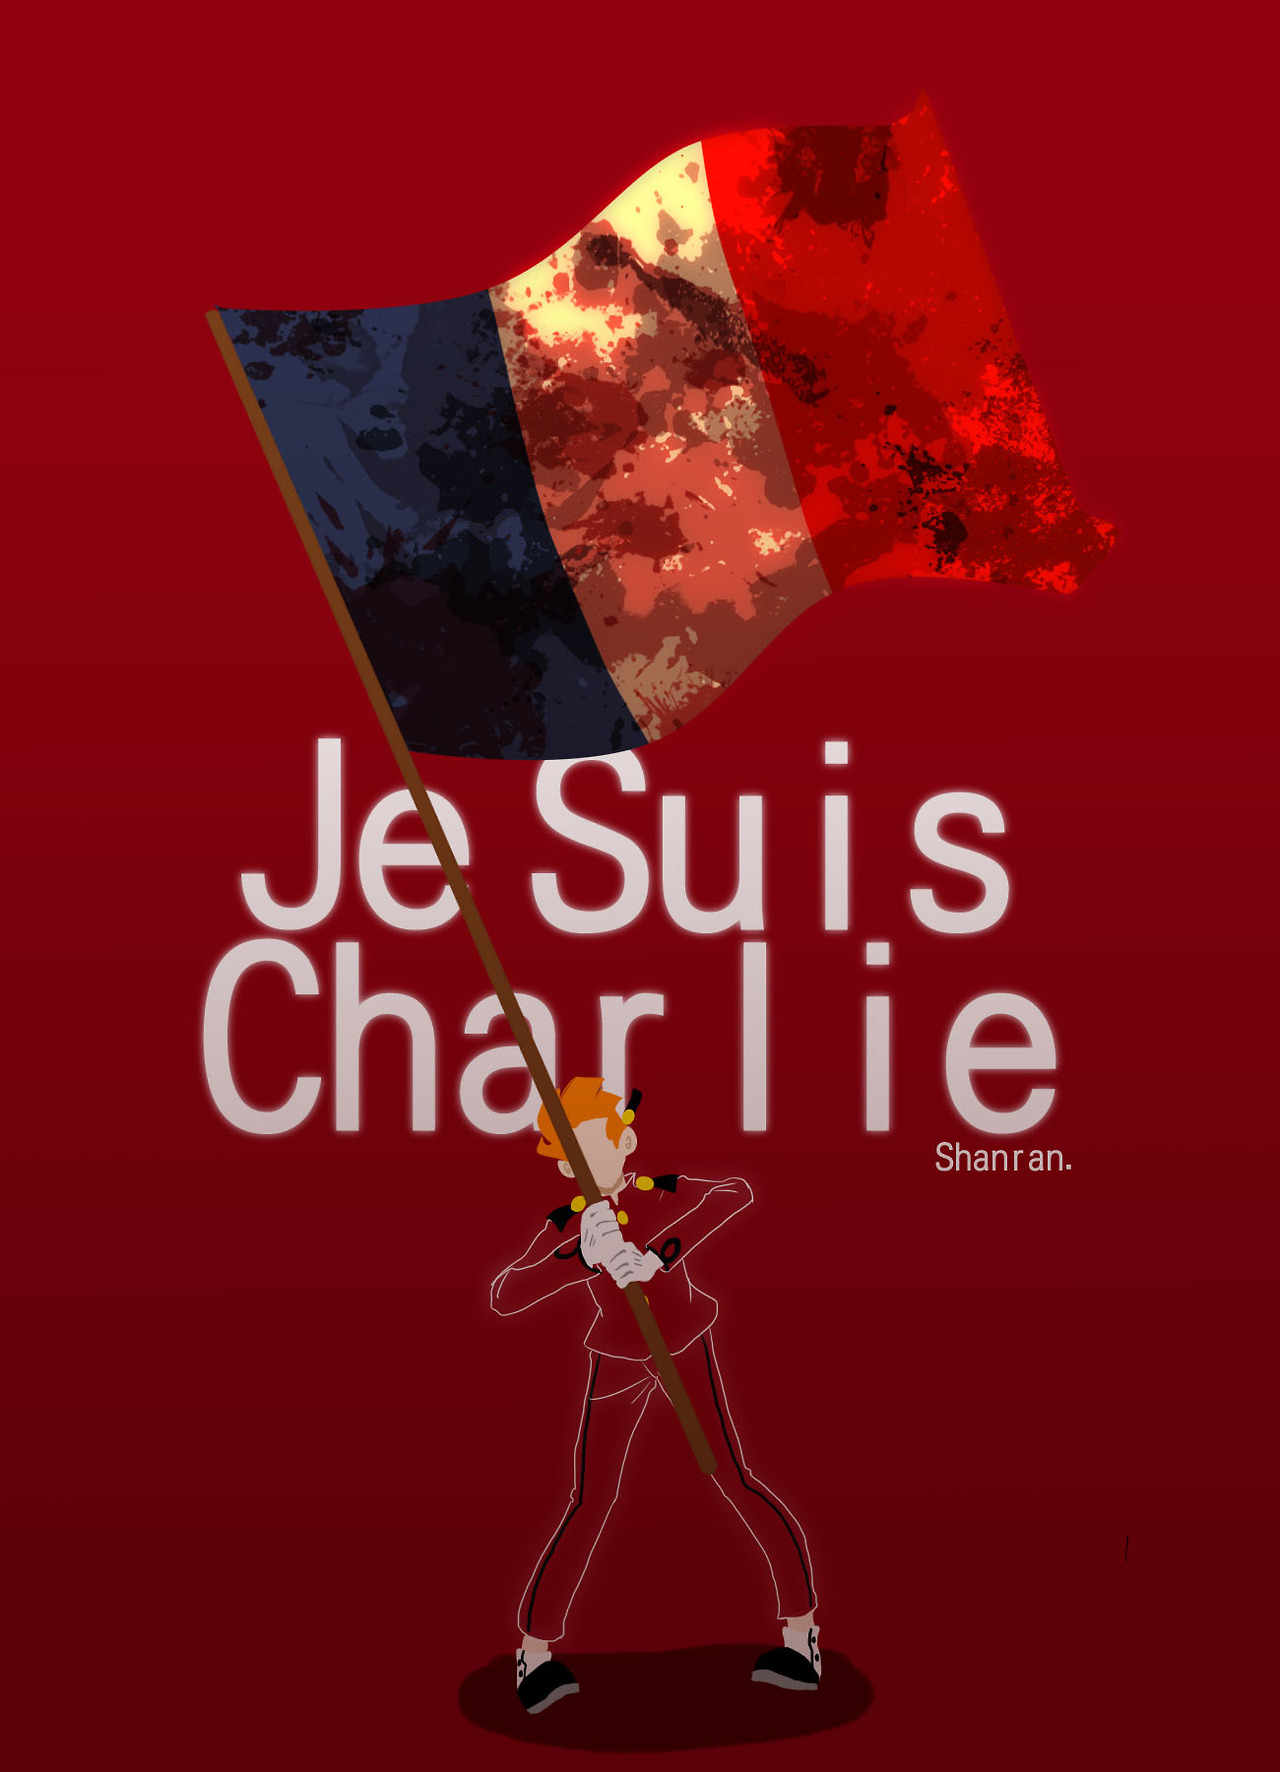 'Je suis Charlie' (ill. Shanran; (c) the artist; Spirou (c) Dupuis; image from tumblr.com)